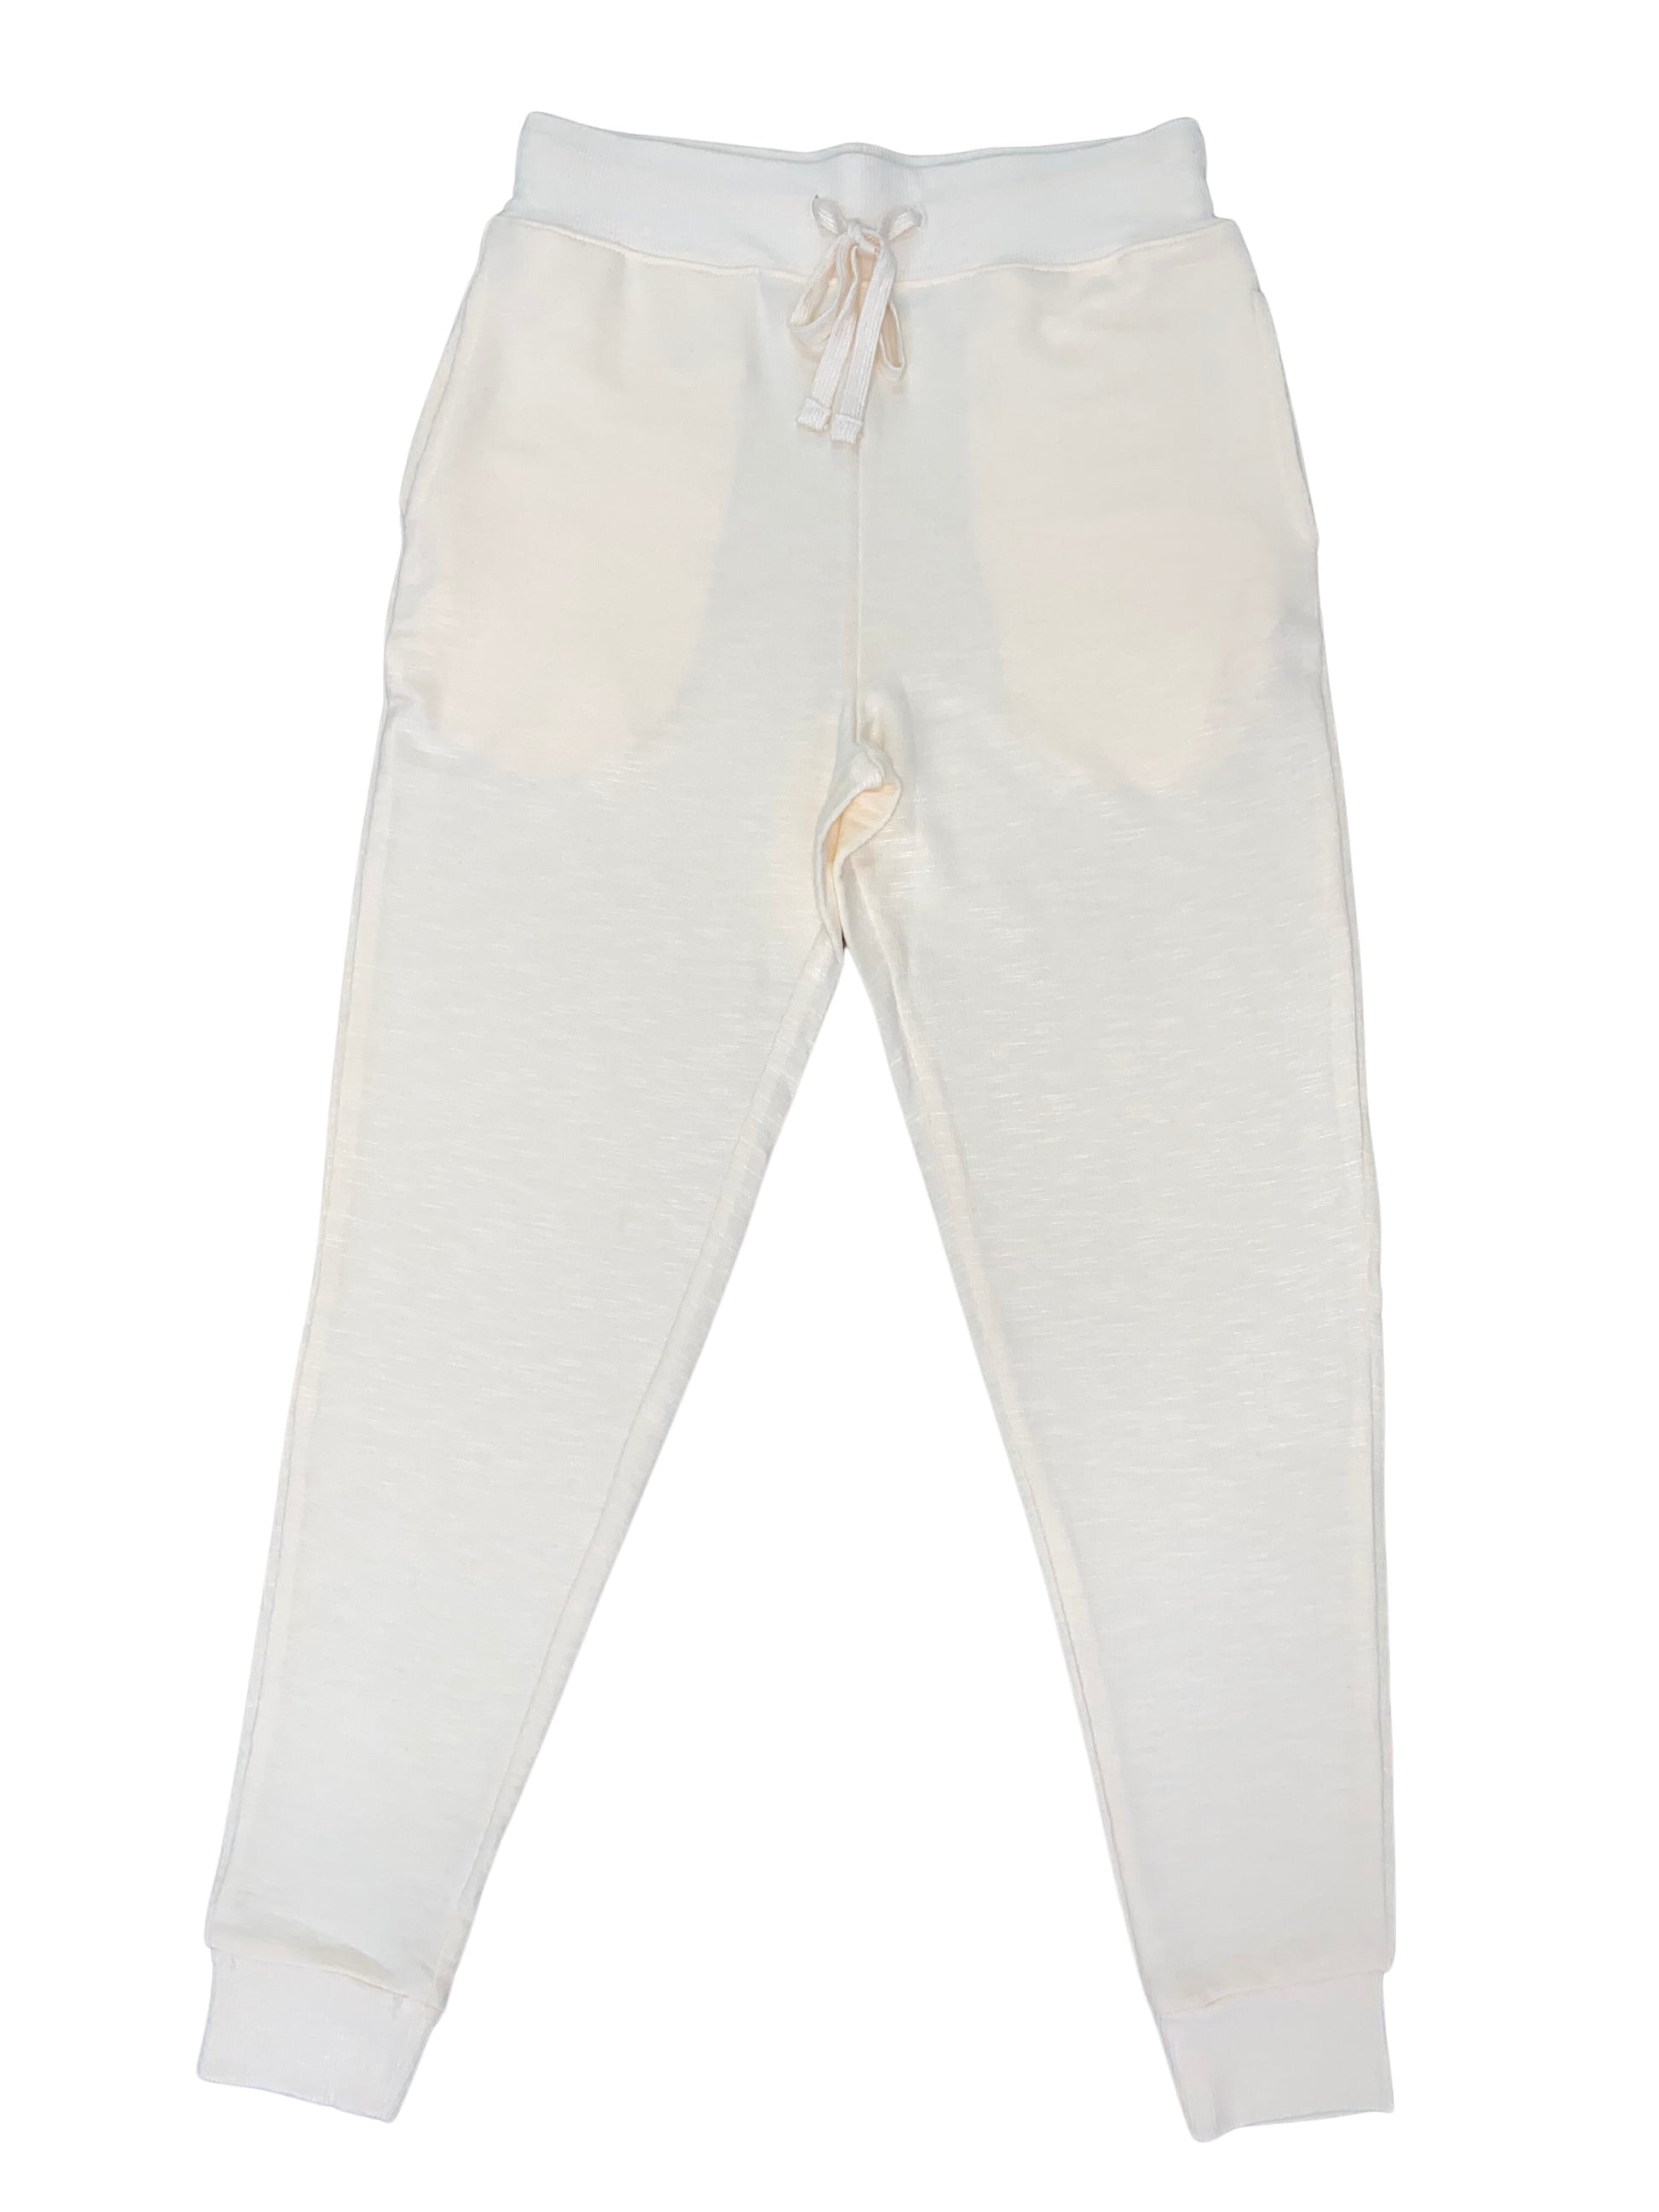 women's lounge French Terry cream jogger pants - 8586